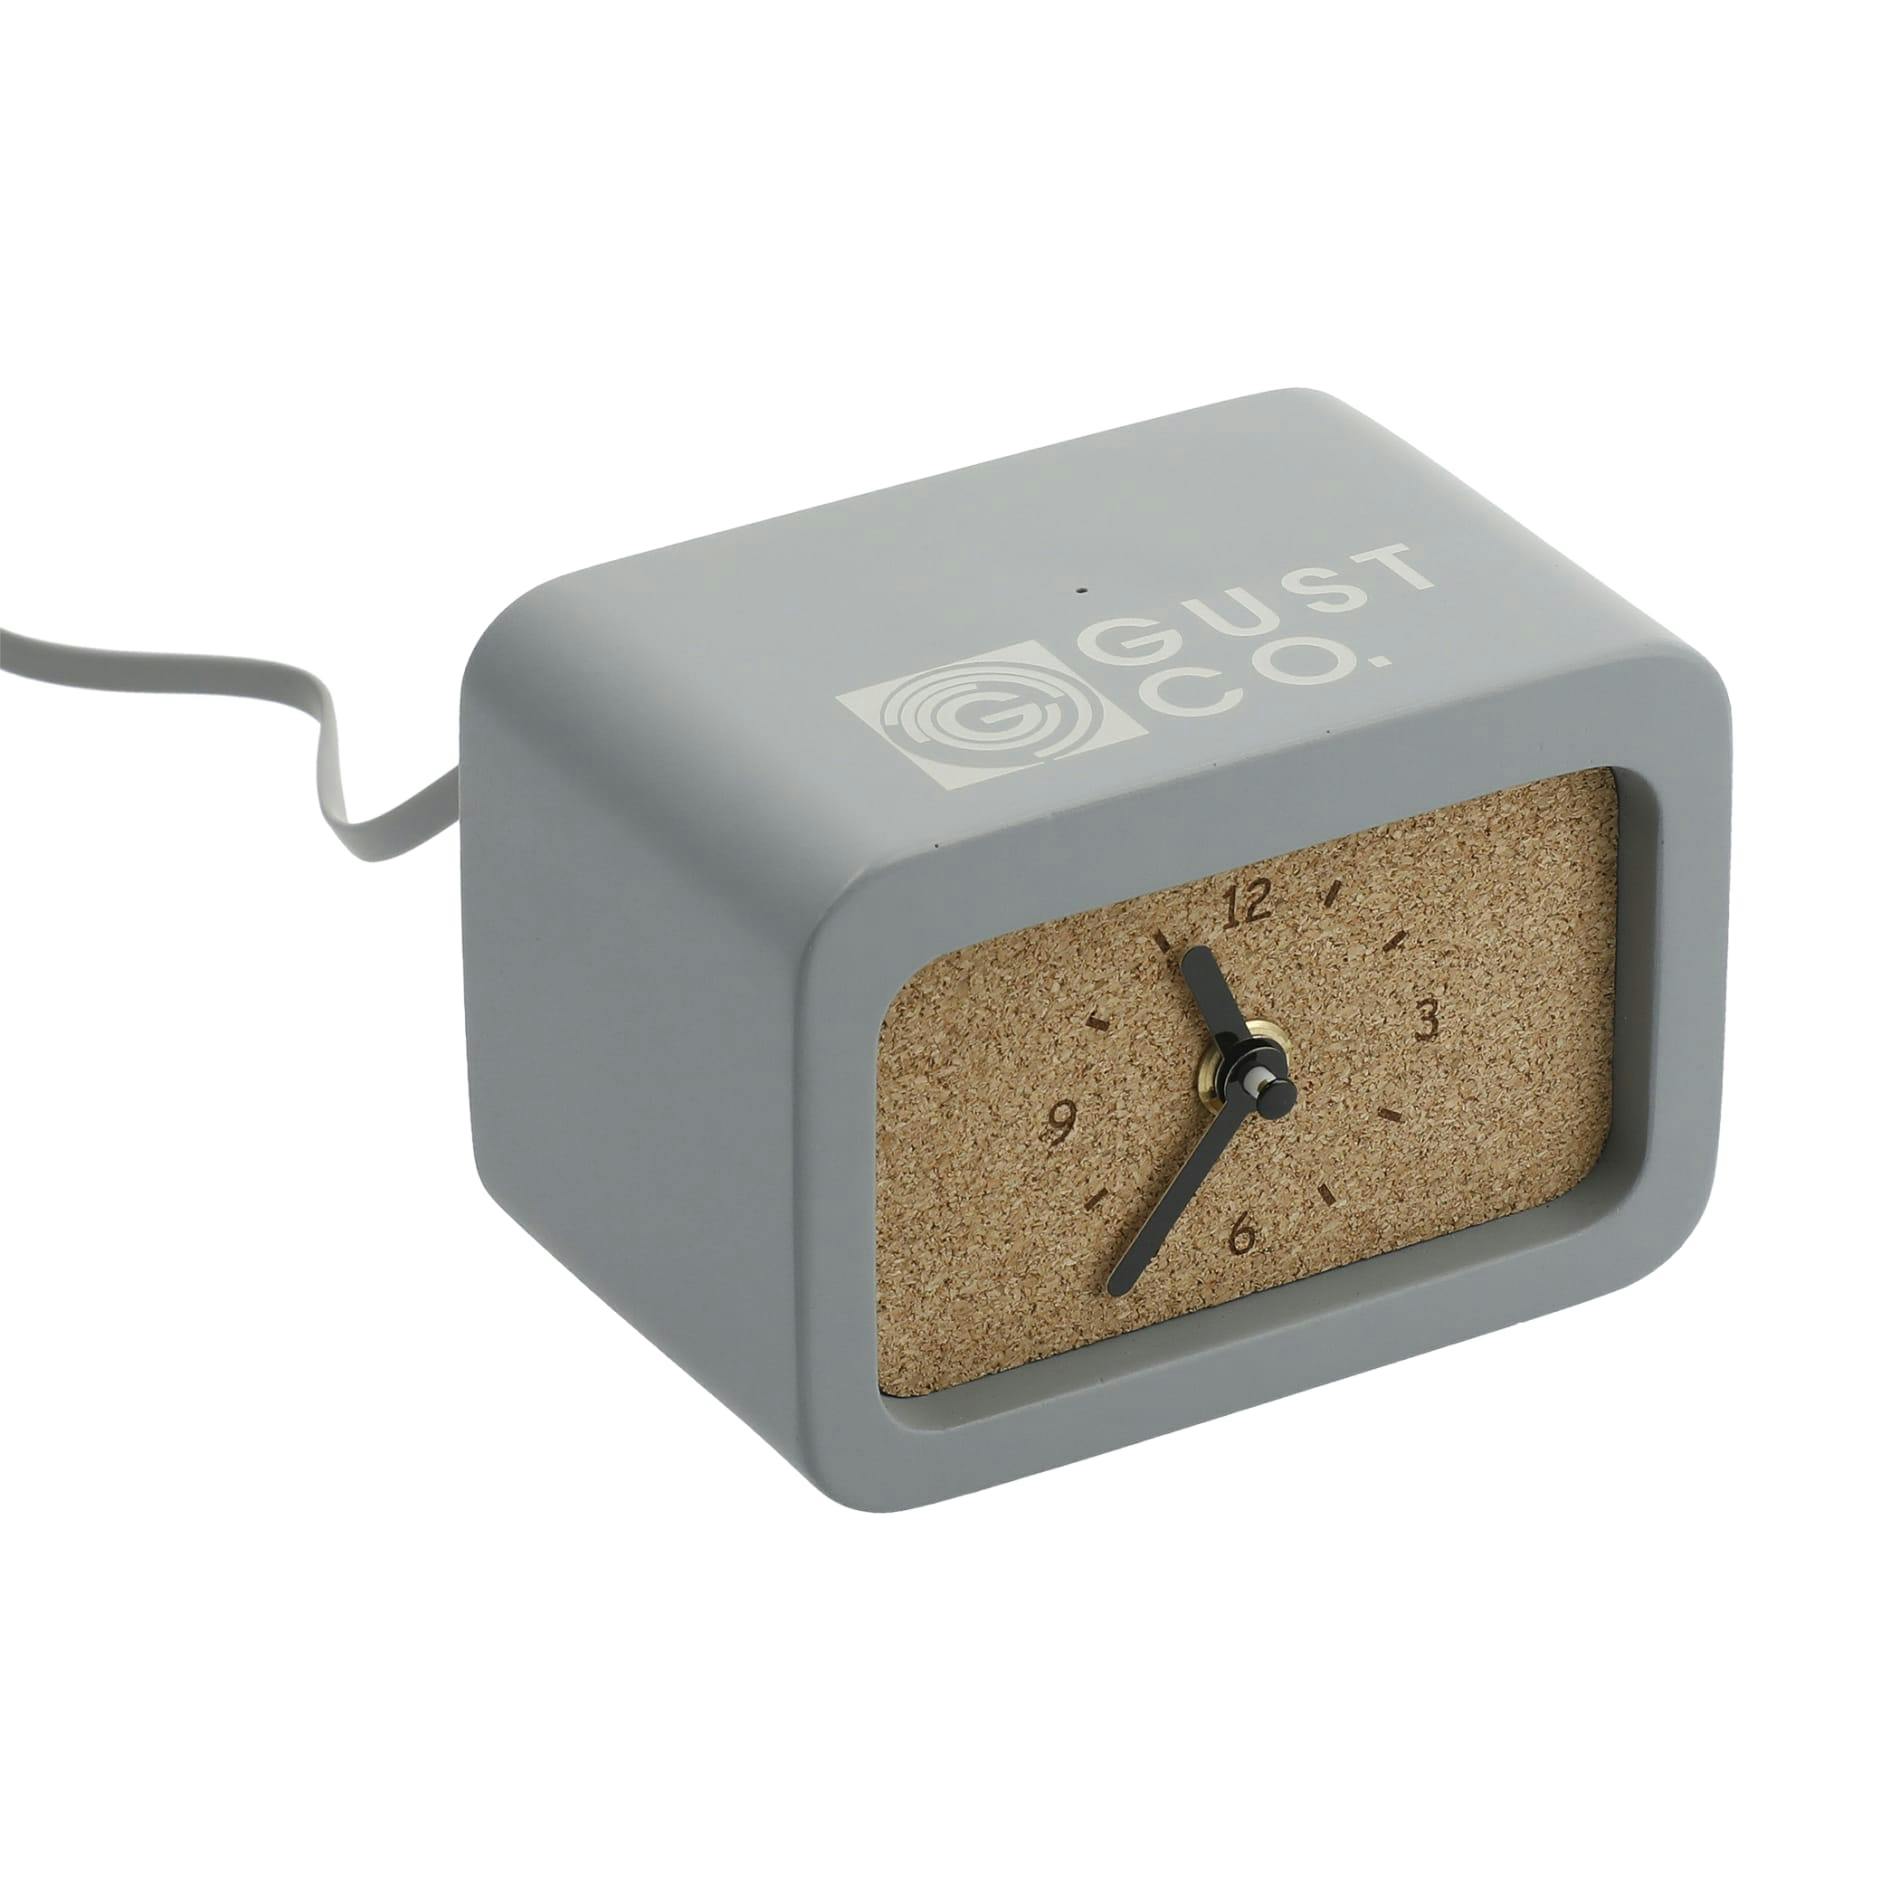 Set in Stone Wireless Charging Desk Clock - additional Image 3